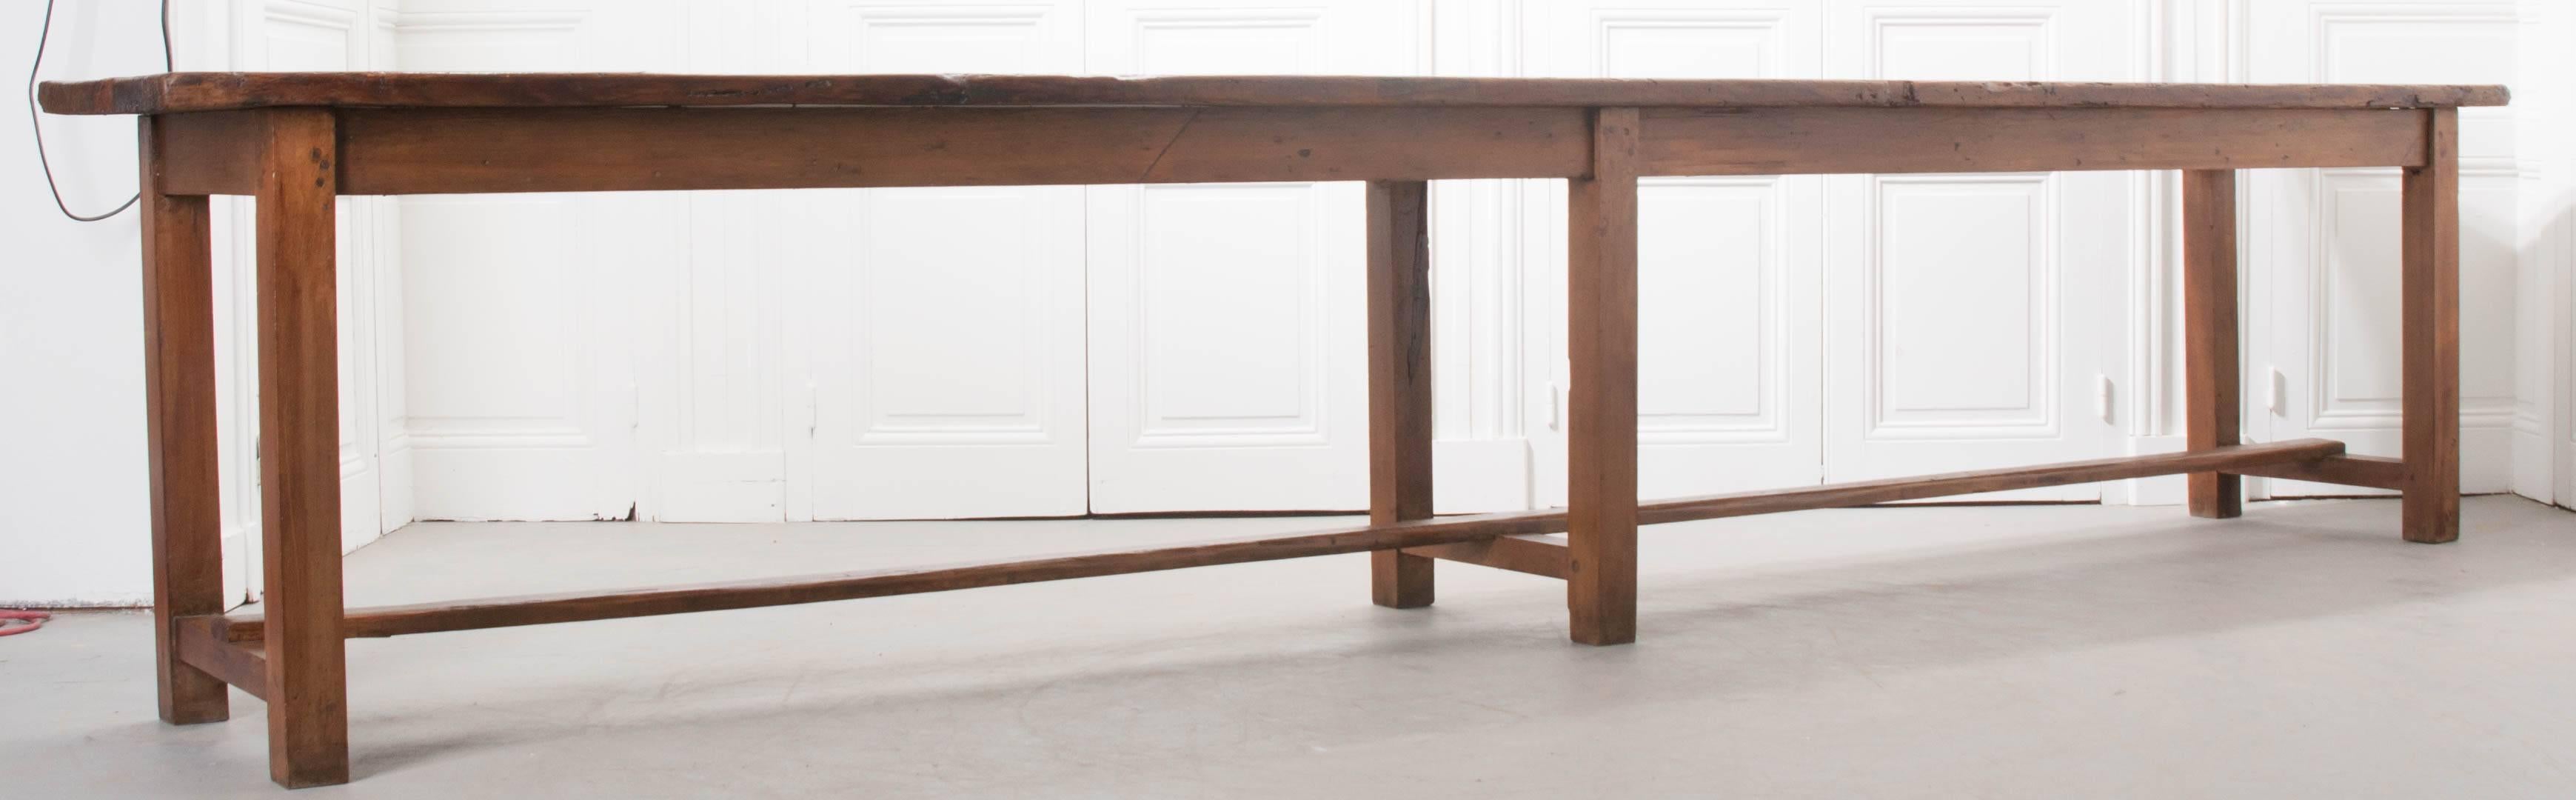 A terrific long, narrow pine work table from 19th century, France. Exceptional patina envelopes the aged pine, created from decades of use. The table is made of solid pine and fashioned together using peg and hole joinery. The table's length